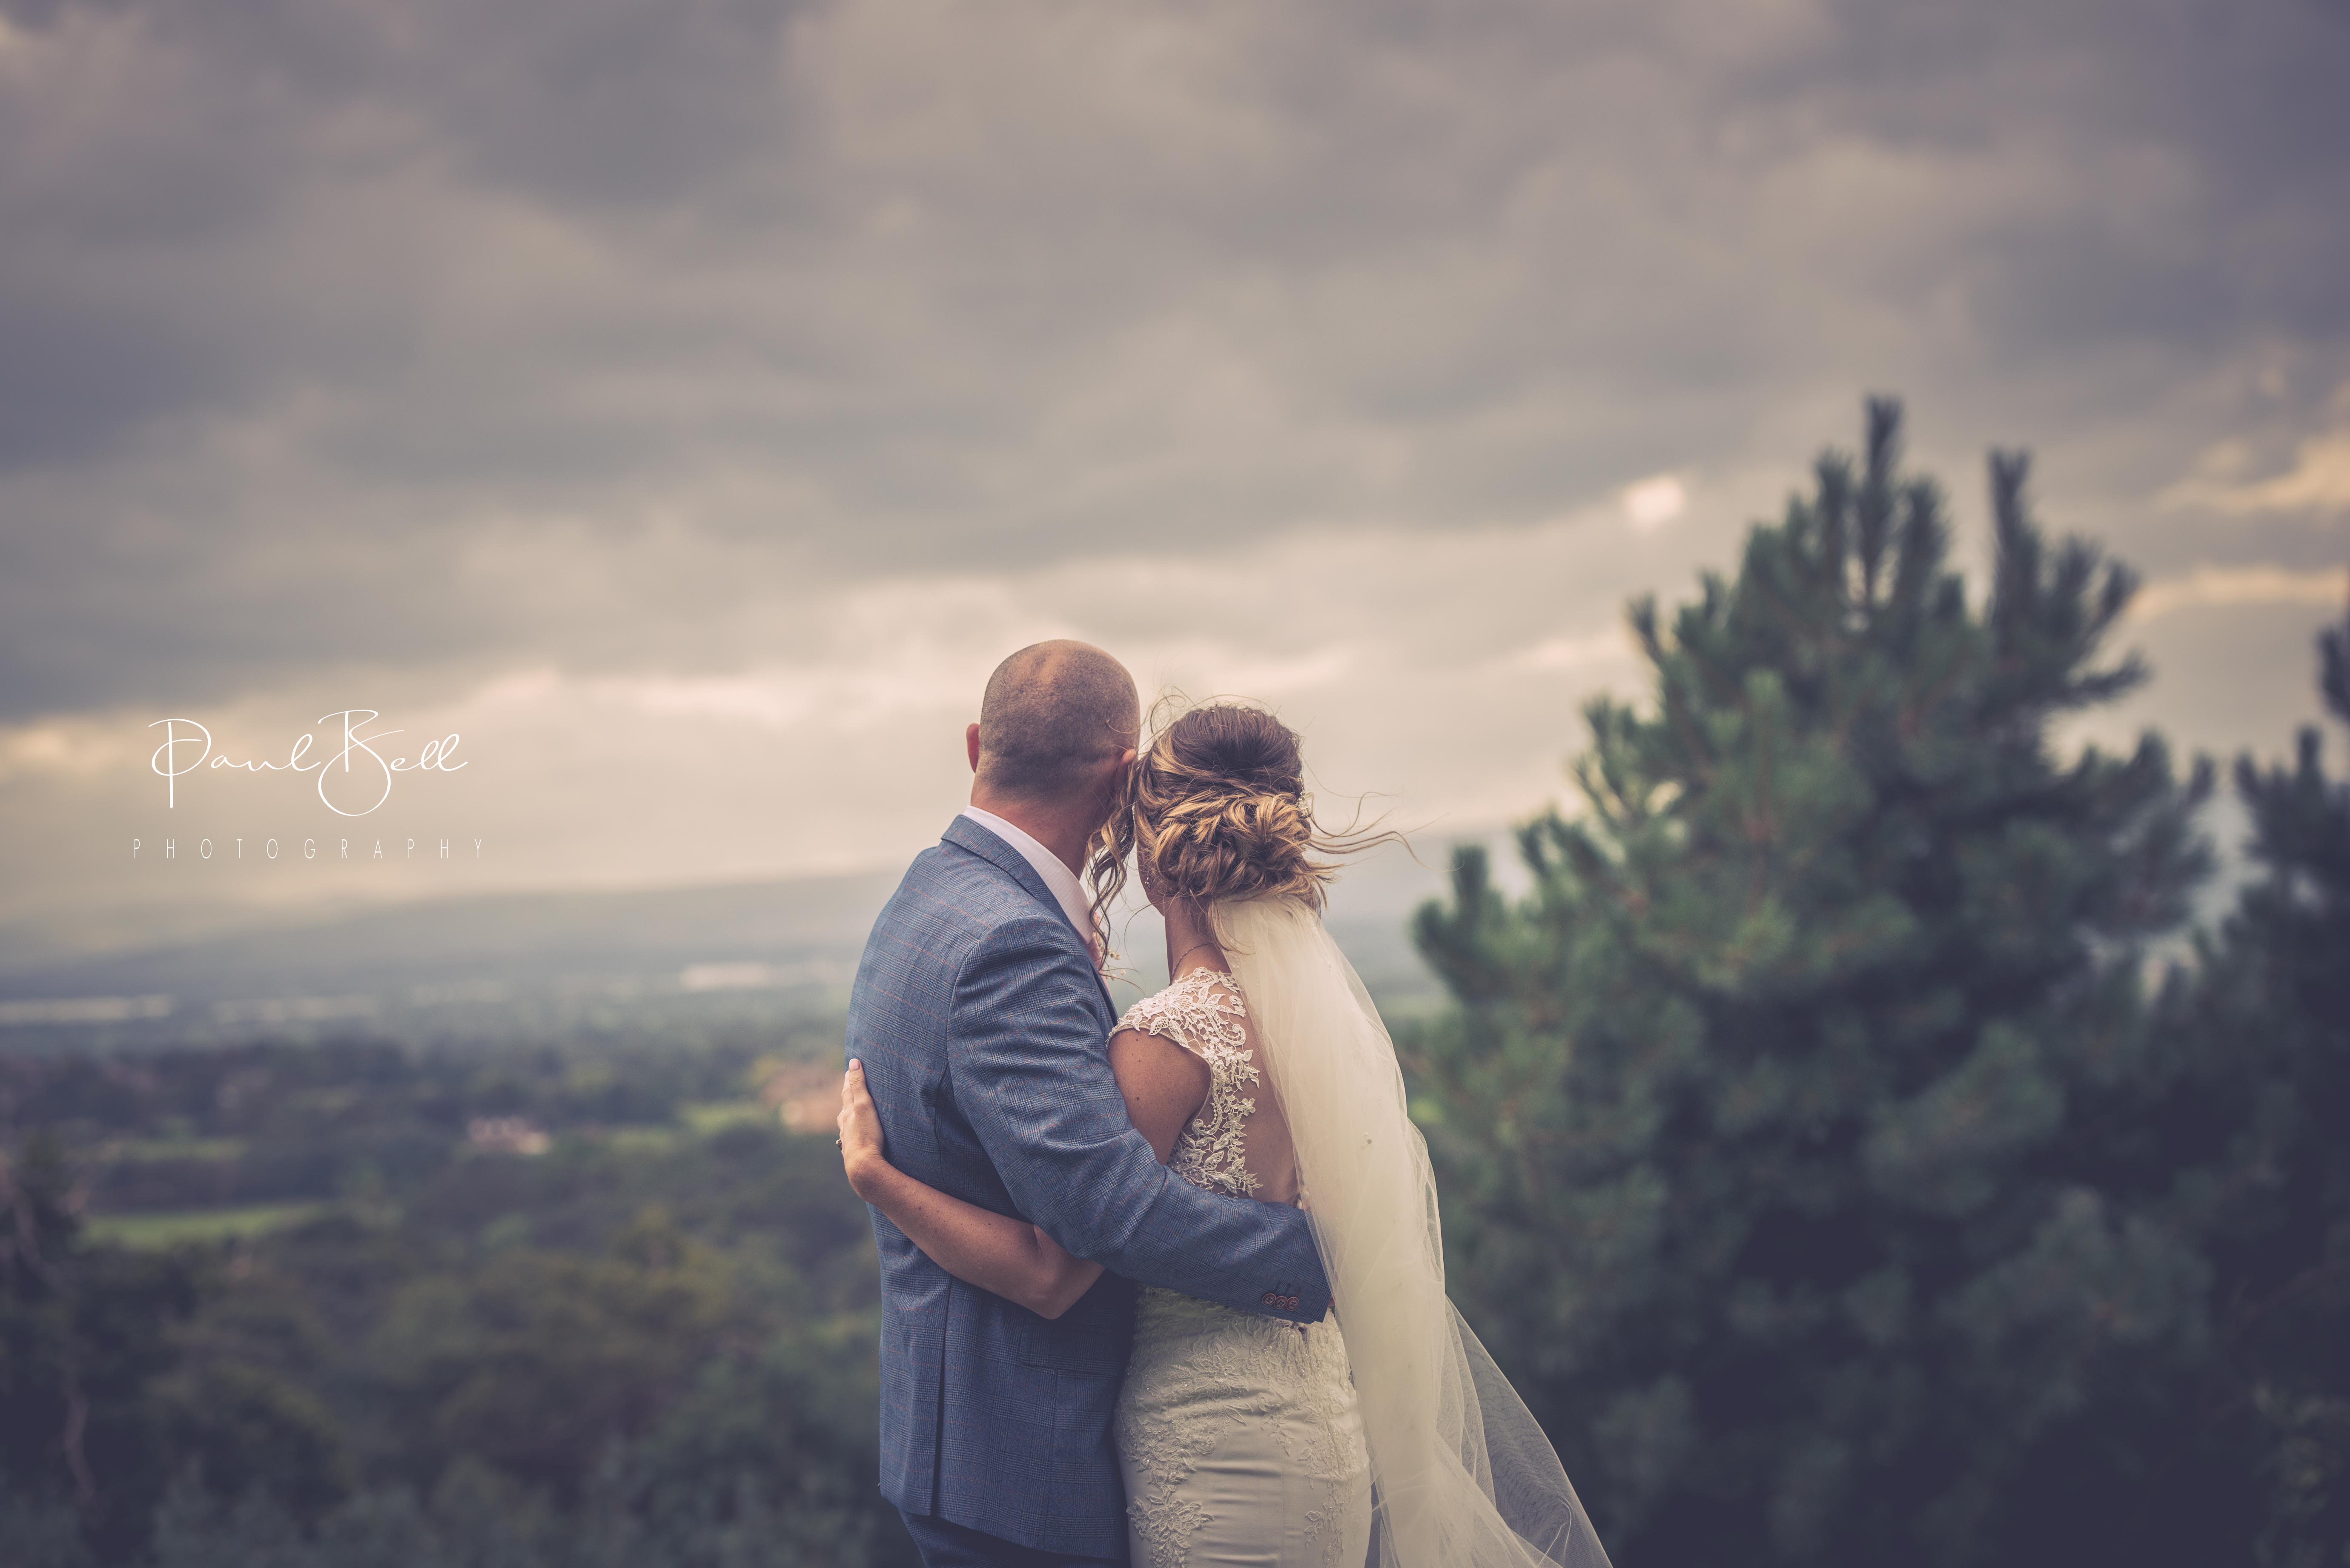 Paul Bell Wedding Photography Nantwich and Cheshire